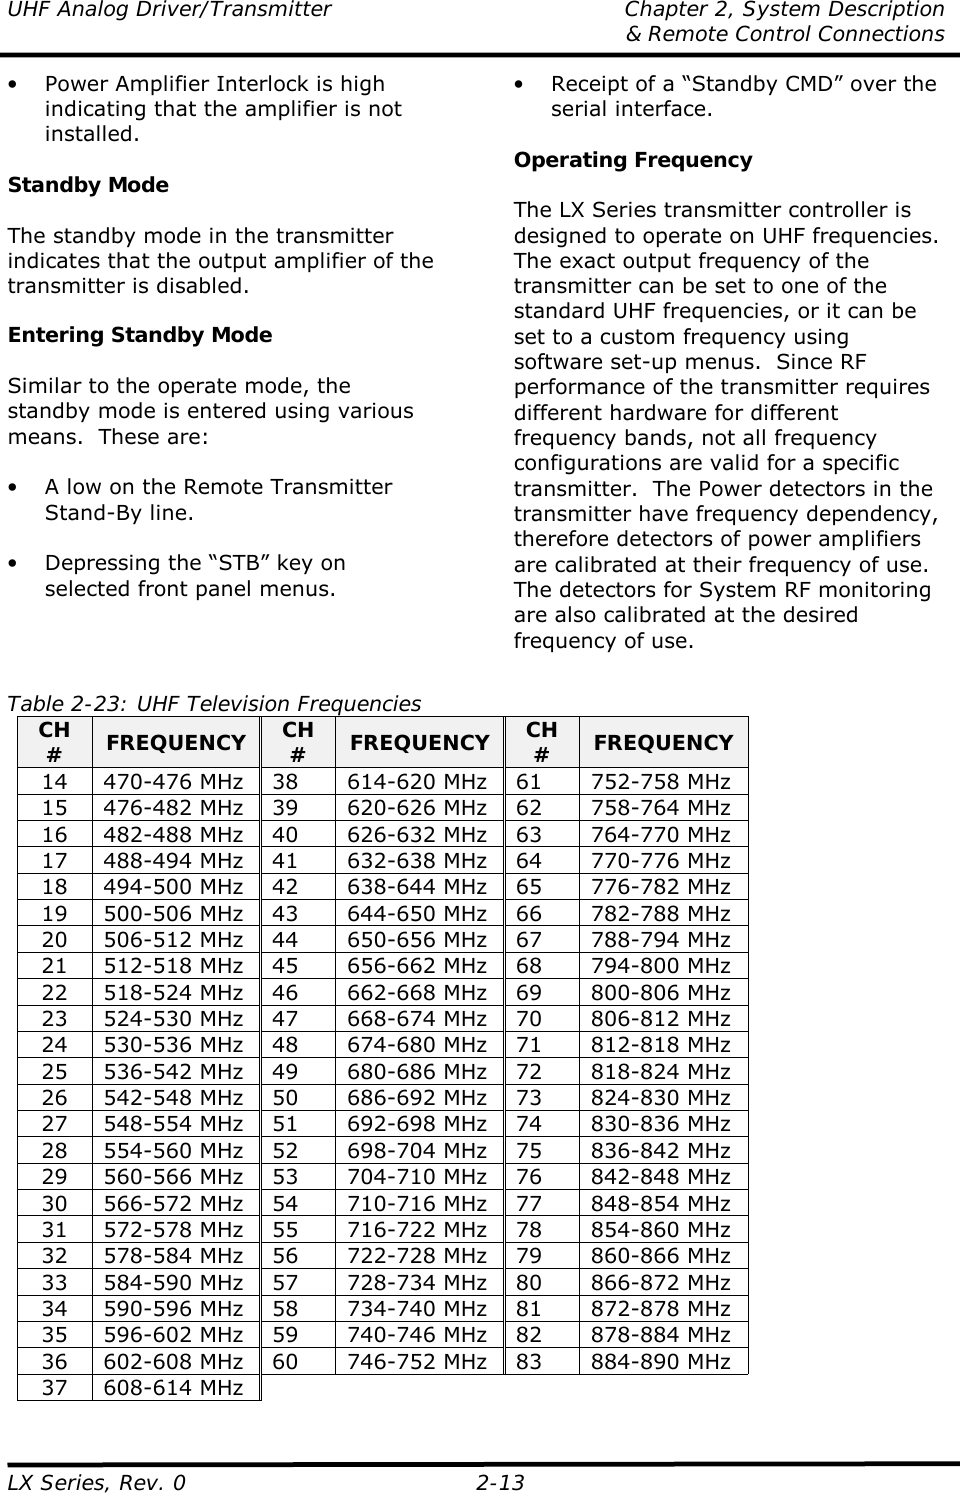 UHF Analog Driver/Transmitter  Chapter 2, System Description   &amp; Remote Control Connections LX Series, Rev. 0  2-13 •  Power Amplifier Interlock is high indicating that the amplifier is not installed.  Standby Mode  The standby mode in the transmitter indicates that the output amplifier of the transmitter is disabled.   Entering Standby Mode  Similar to the operate mode, the standby mode is entered using various means.  These are:  •  A low on the Remote Transmitter Stand-By line.  •  Depressing the “STB” key on selected front panel menus.   •  Receipt of a “Standby CMD” over the serial interface.  Operating Frequency  The LX Series transmitter controller is designed to operate on UHF frequencies.  The exact output frequency of the transmitter can be set to one of the standard UHF frequencies, or it can be set to a custom frequency using software set-up menus.  Since RF performance of the transmitter requires different hardware for different frequency bands, not all frequency configurations are valid for a specific transmitter.  The Power detectors in the transmitter have frequency dependency, therefore detectors of power amplifiers are calibrated at their frequency of use.  The detectors for System RF monitoring are also calibrated at the desired frequency of use.  Table 2-23: UHF Television Frequencies CH #  FREQUENCY  CH #  FREQUENCY  CH #  FREQUENCY 14  470-476 MHz  38  614-620 MHz  61  752-758 MHz 15  476-482 MHz  39  620-626 MHz  62  758-764 MHz 16  482-488 MHz  40  626-632 MHz  63  764-770 MHz 17  488-494 MHz  41  632-638 MHz  64  770-776 MHz 18  494-500 MHz  42  638-644 MHz  65  776-782 MHz 19  500-506 MHz  43  644-650 MHz  66  782-788 MHz 20  506-512 MHz  44  650-656 MHz  67  788-794 MHz 21  512-518 MHz  45  656-662 MHz  68  794-800 MHz 22  518-524 MHz  46  662-668 MHz  69  800-806 MHz 23  524-530 MHz  47  668-674 MHz  70  806-812 MHz 24  530-536 MHz  48  674-680 MHz  71  812-818 MHz 25  536-542 MHz  49  680-686 MHz  72  818-824 MHz 26  542-548 MHz  50  686-692 MHz  73  824-830 MHz 27  548-554 MHz  51  692-698 MHz  74  830-836 MHz 28  554-560 MHz  52  698-704 MHz  75  836-842 MHz 29  560-566 MHz  53  704-710 MHz  76  842-848 MHz 30  566-572 MHz  54  710-716 MHz  77  848-854 MHz 31  572-578 MHz  55  716-722 MHz  78  854-860 MHz 32  578-584 MHz  56  722-728 MHz  79  860-866 MHz 33  584-590 MHz  57  728-734 MHz  80  866-872 MHz 34  590-596 MHz  58  734-740 MHz  81  872-878 MHz 35  596-602 MHz  59  740-746 MHz  82  878-884 MHz 36  602-608 MHz  60  746-752 MHz  83  884-890 MHz 37 608-614 MHz      